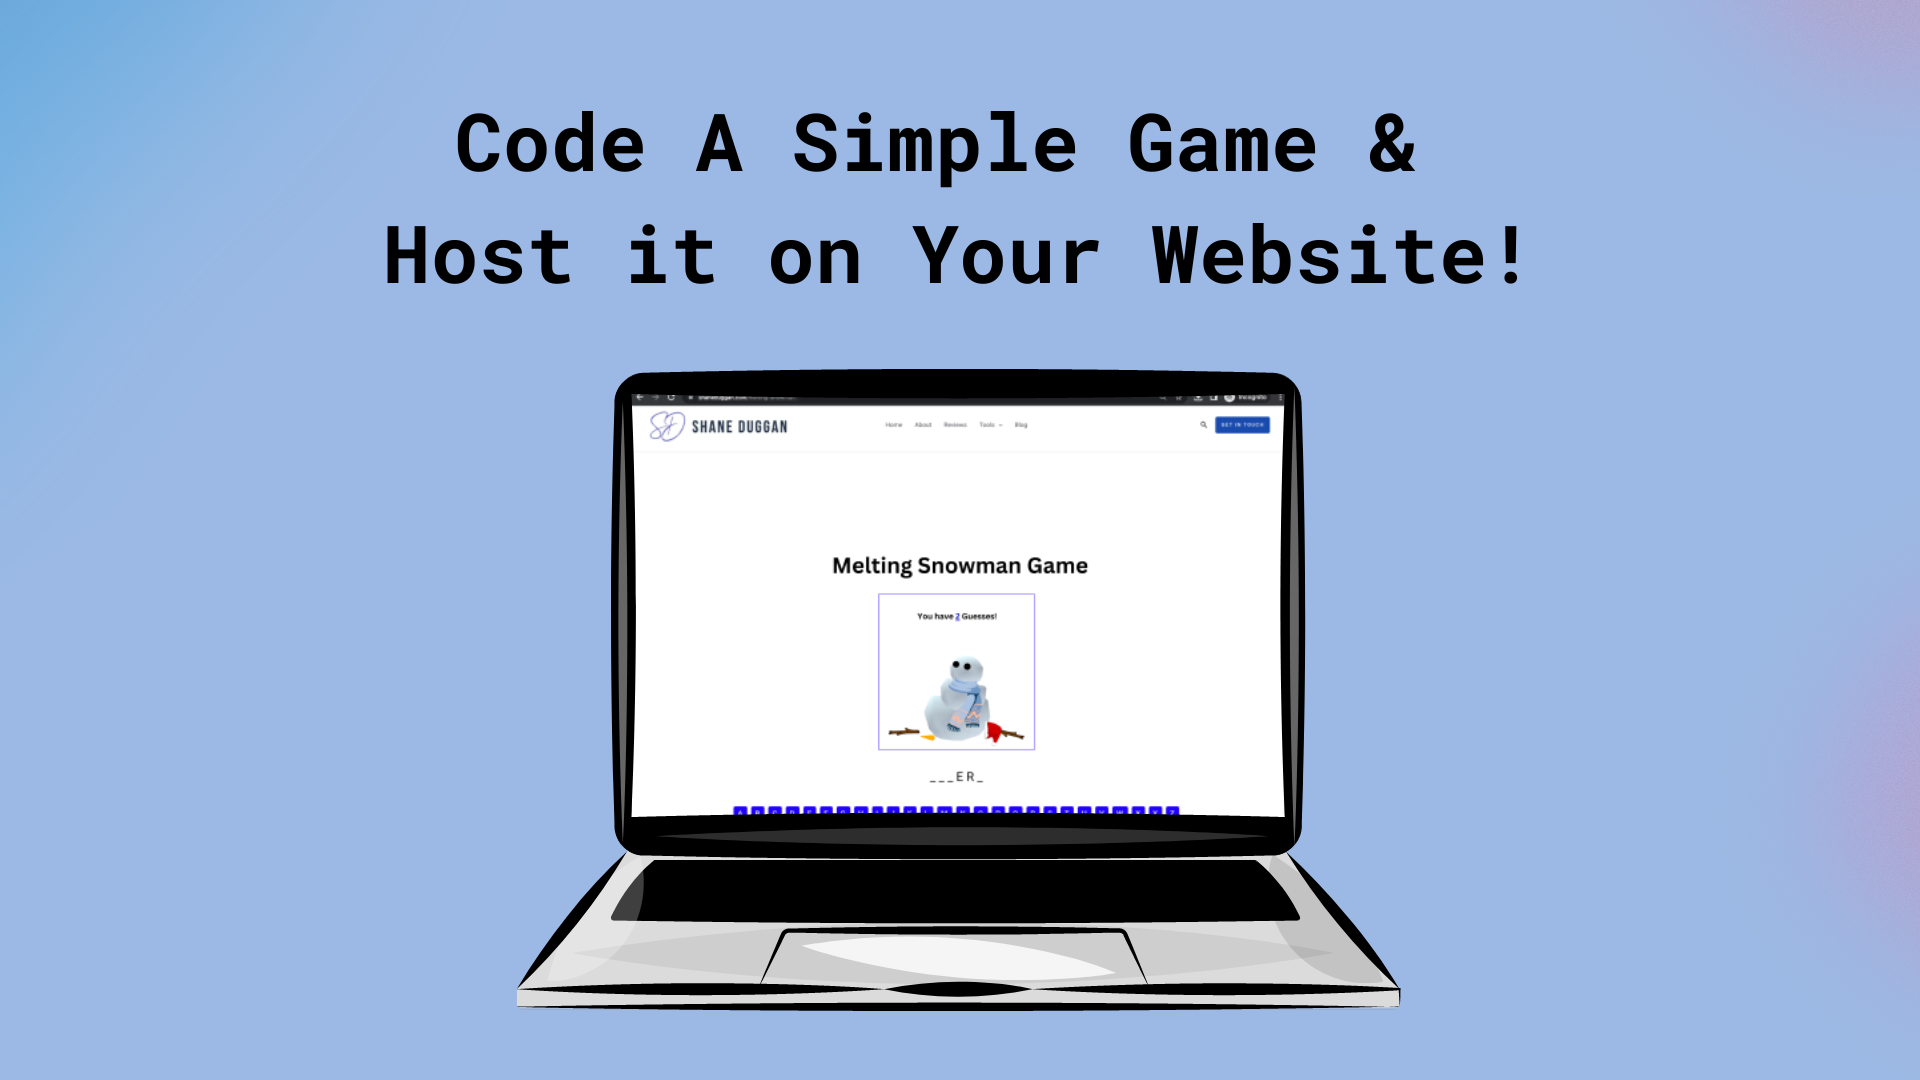 How to Code a Simple Game and Host it on Your Website